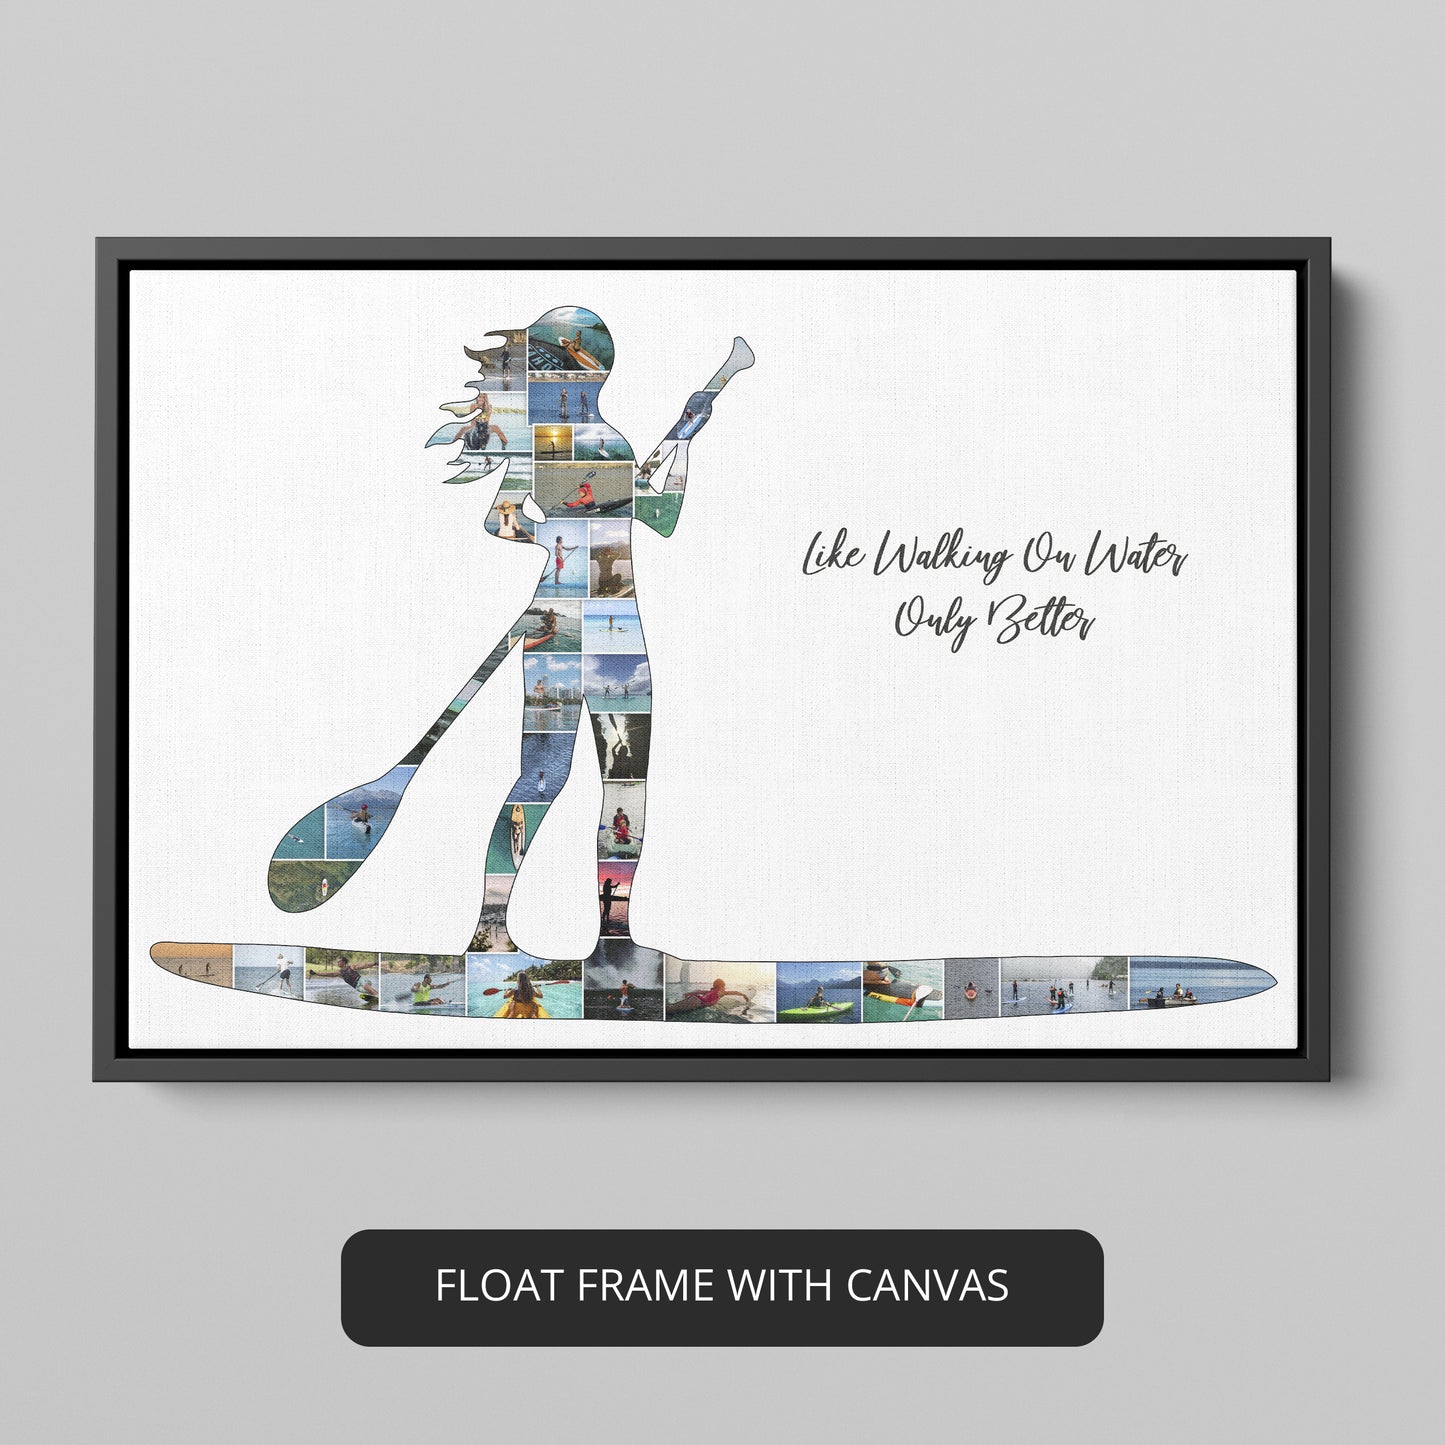 Scuba Diving Art Prints - Decorate Your Space with Underwater Adventures